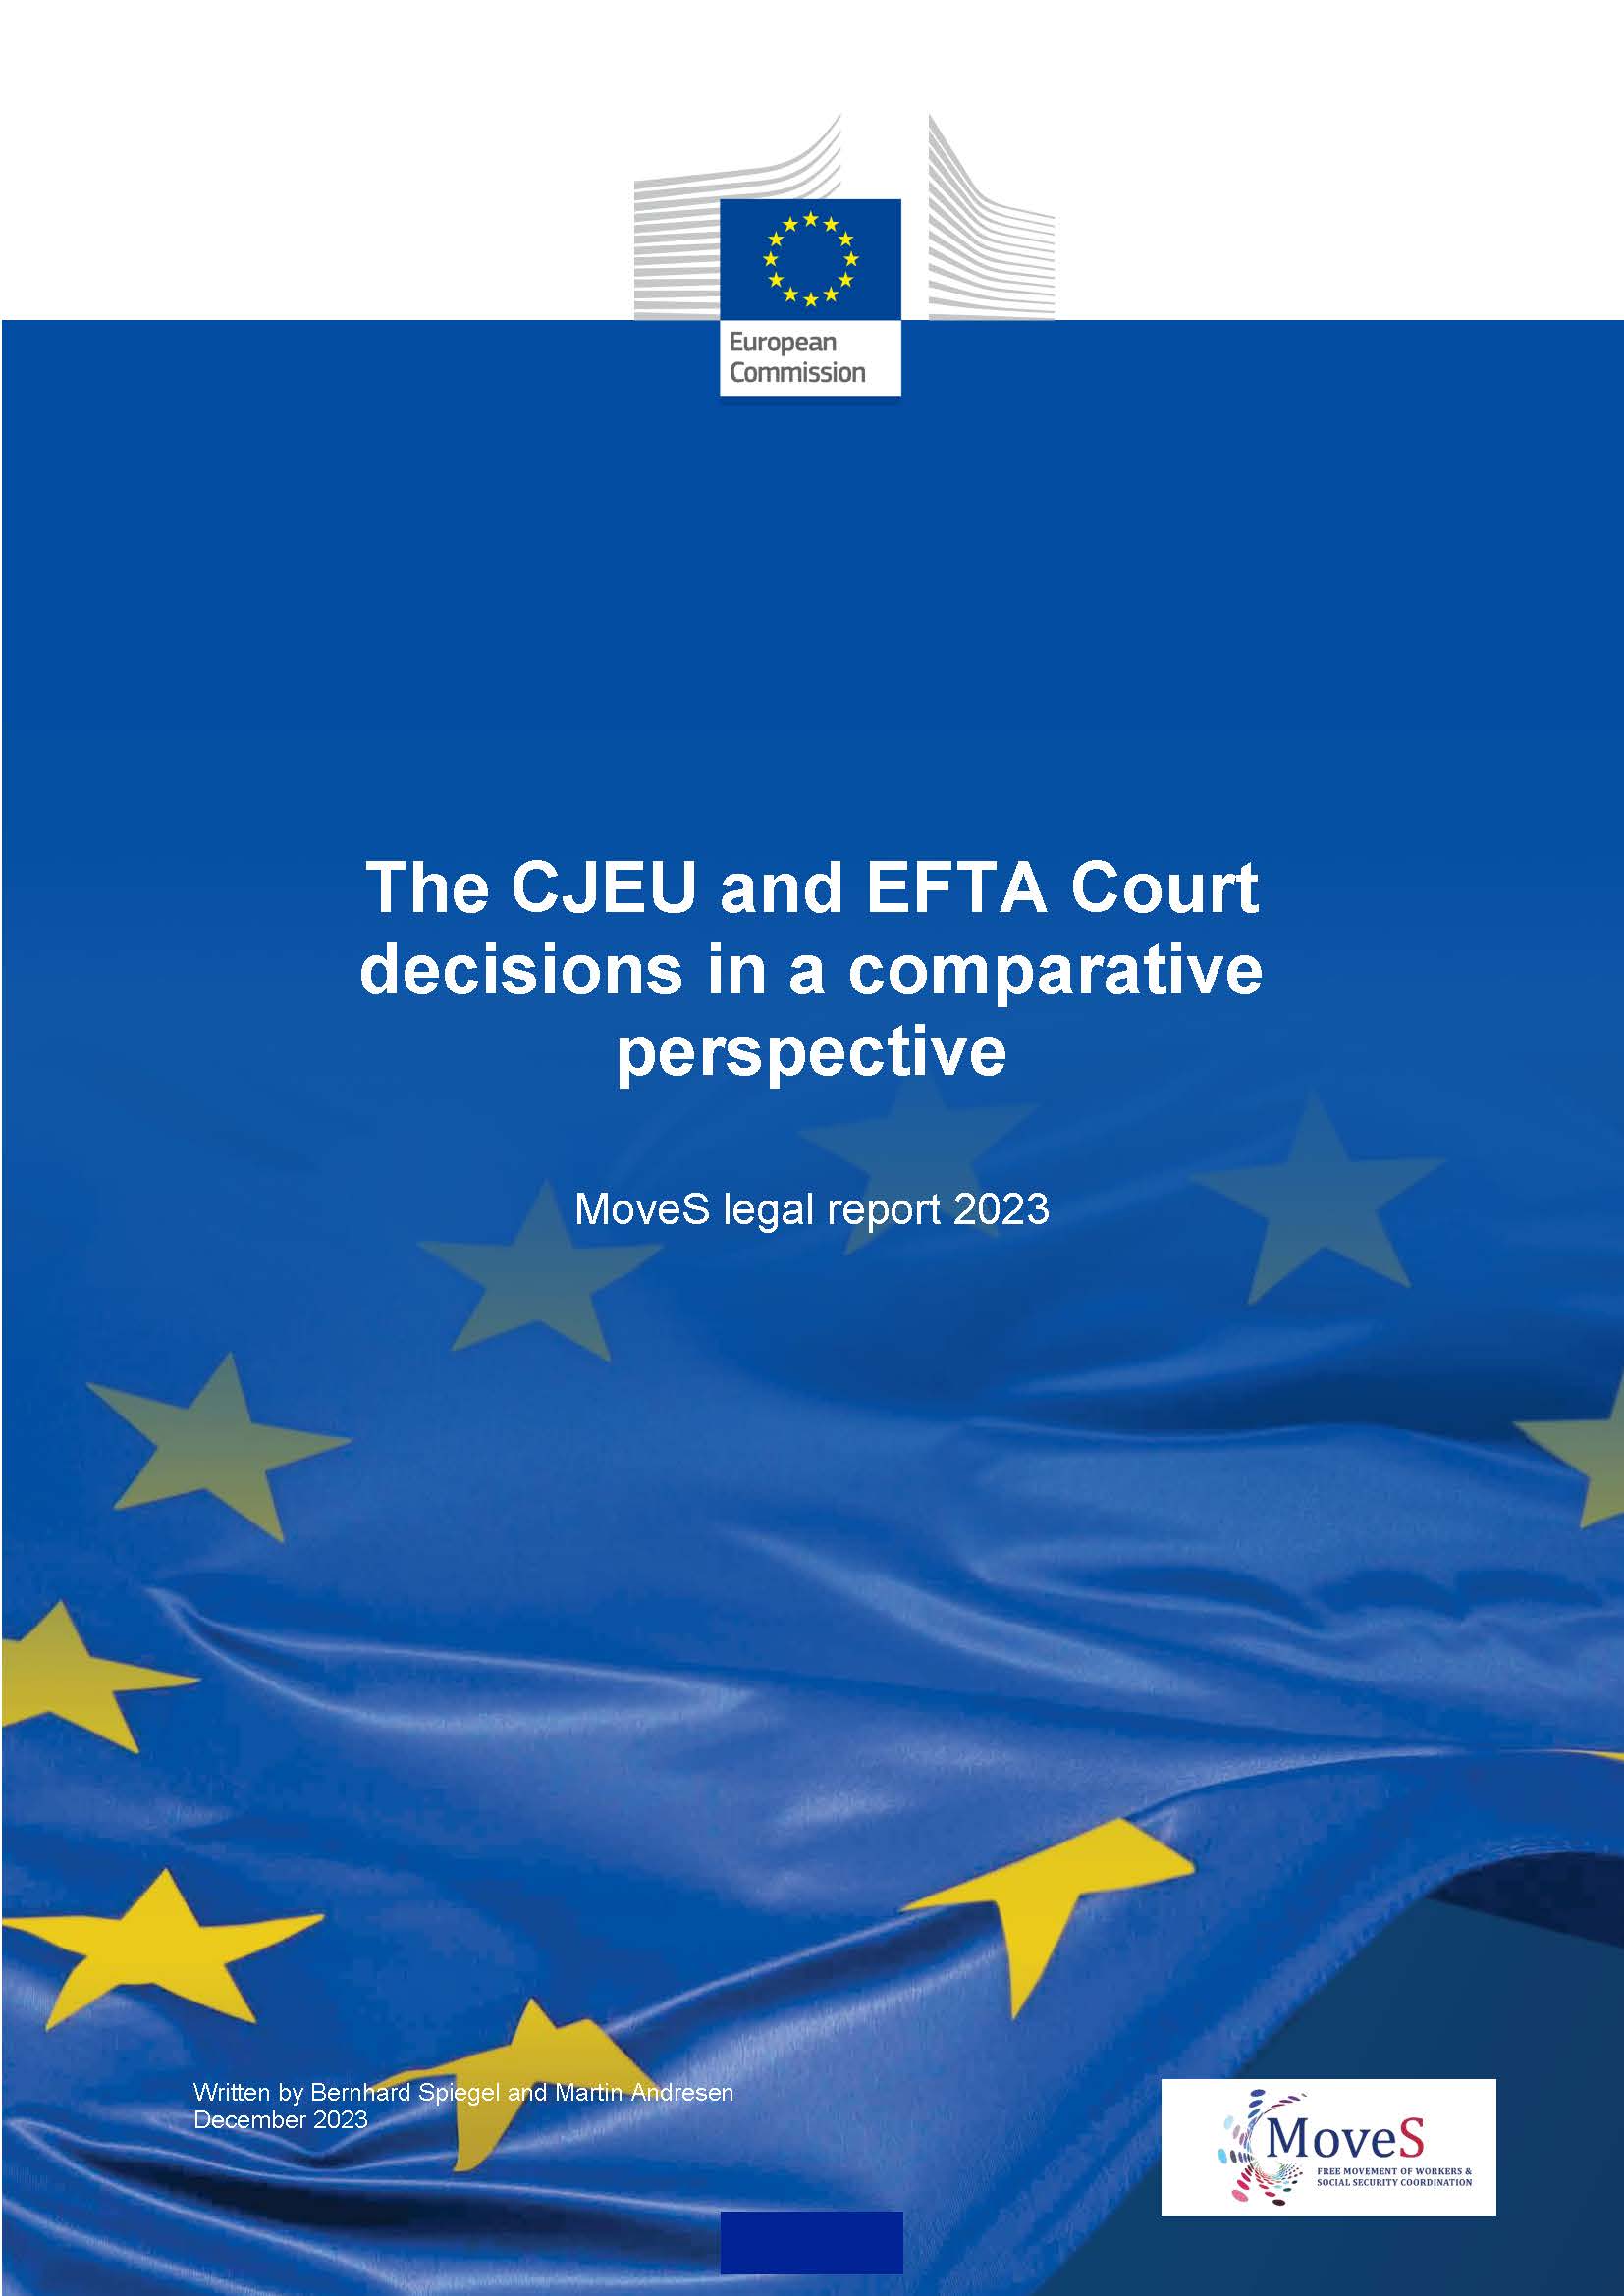 The CJEU and EFTA Court decisions in a comparative perspective: MoveS legal report 2023